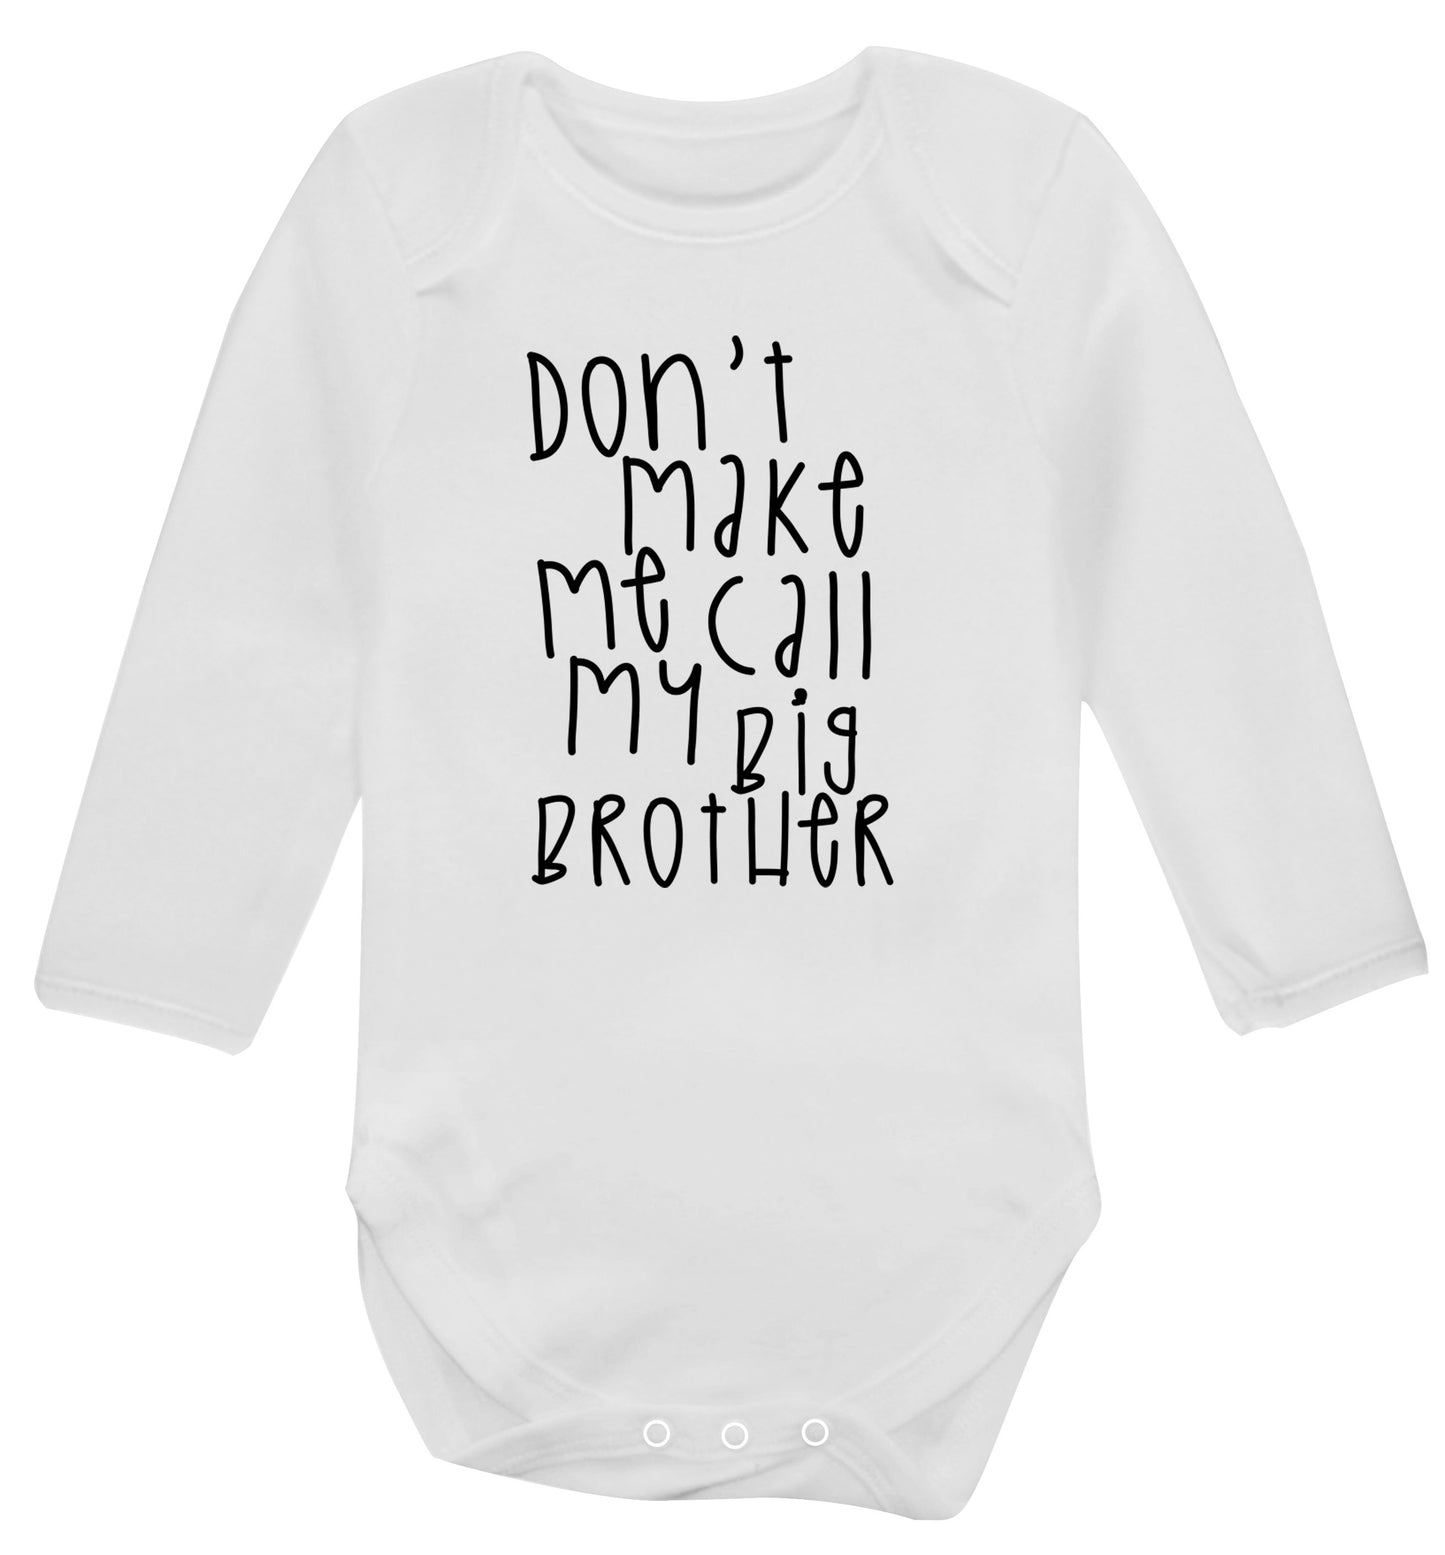 Don't make me call my big brother Baby Vest long sleeved white 6-12 months